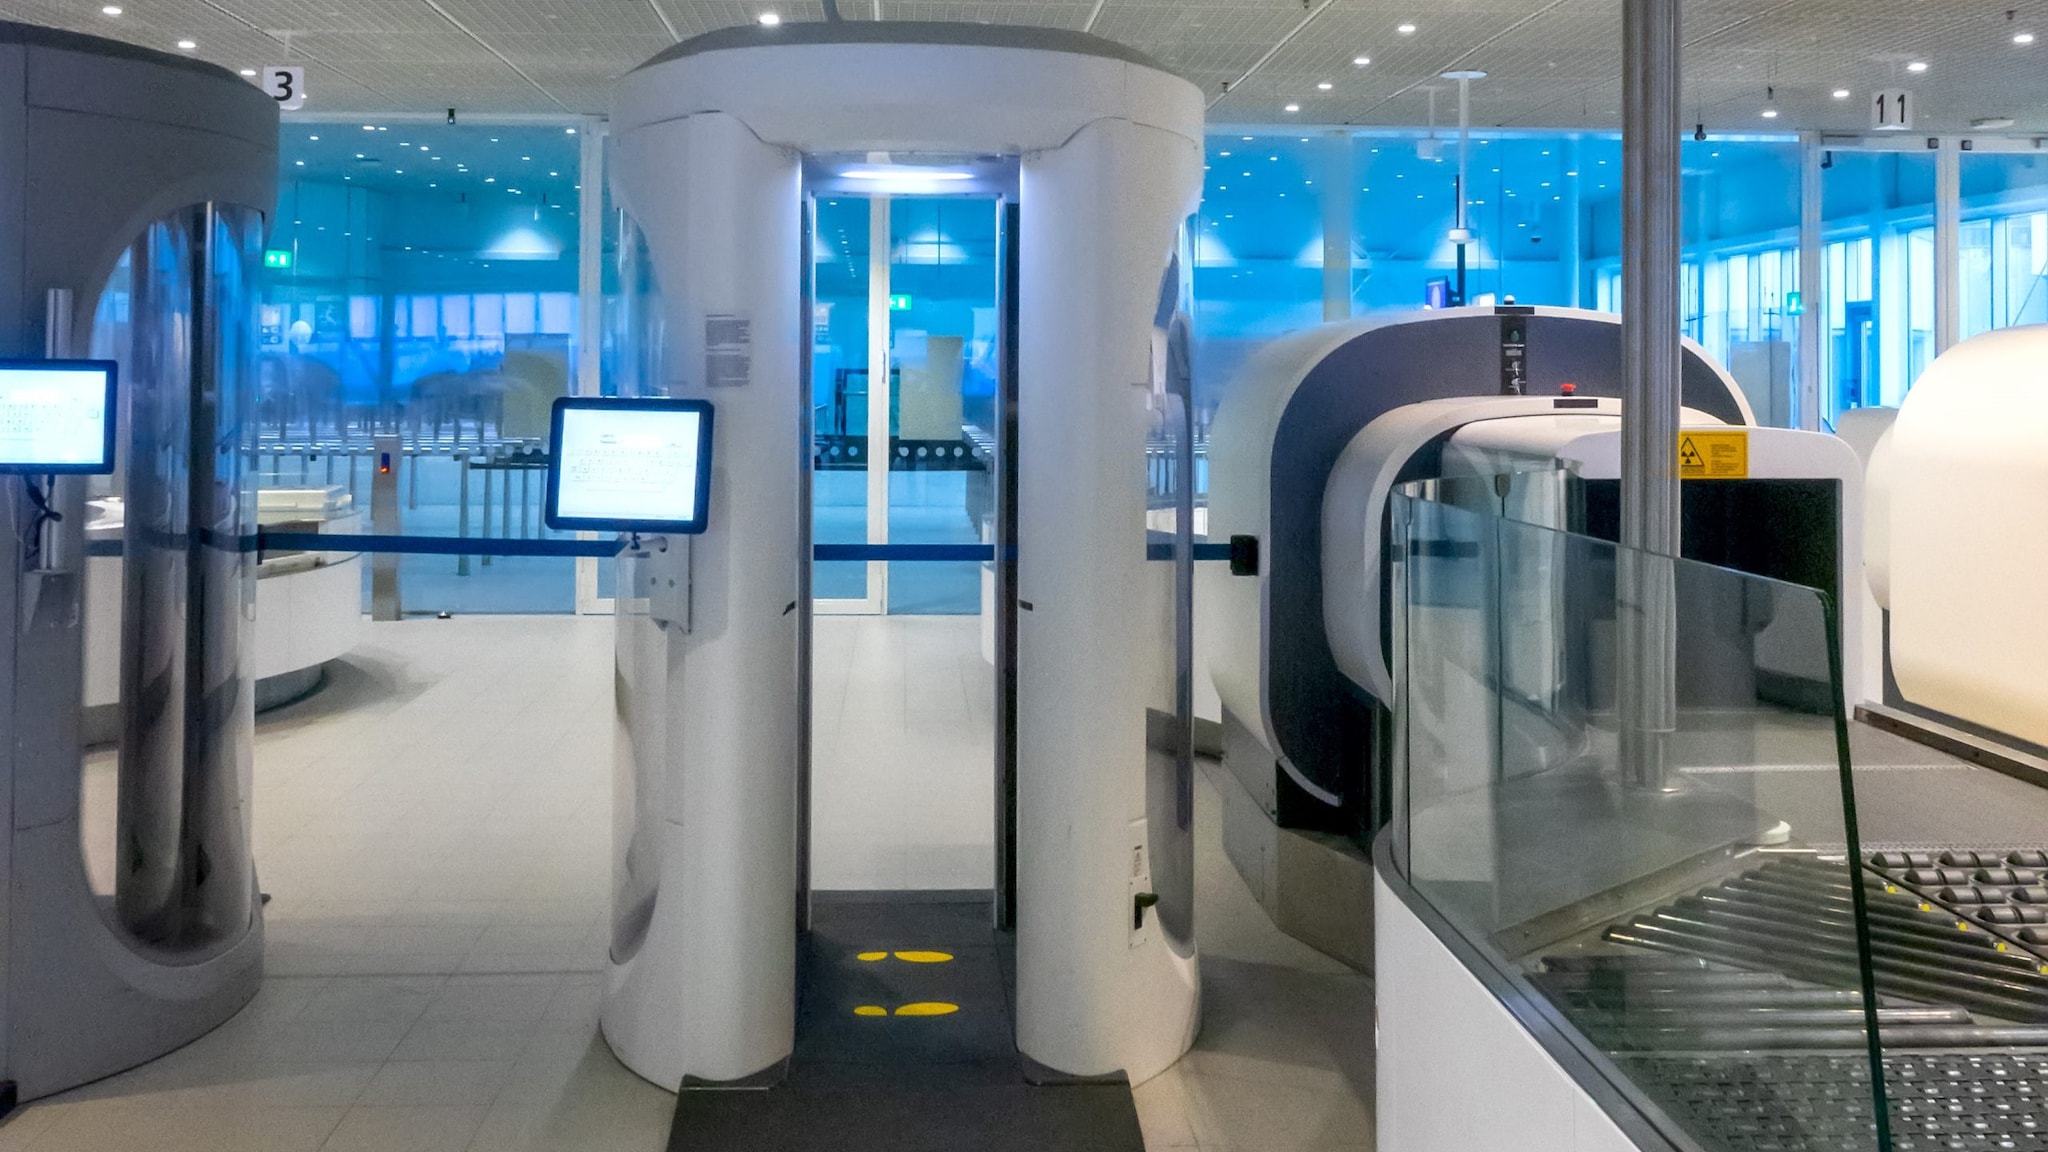 Body scanners using millimeter wave technology are being used in United States airports.